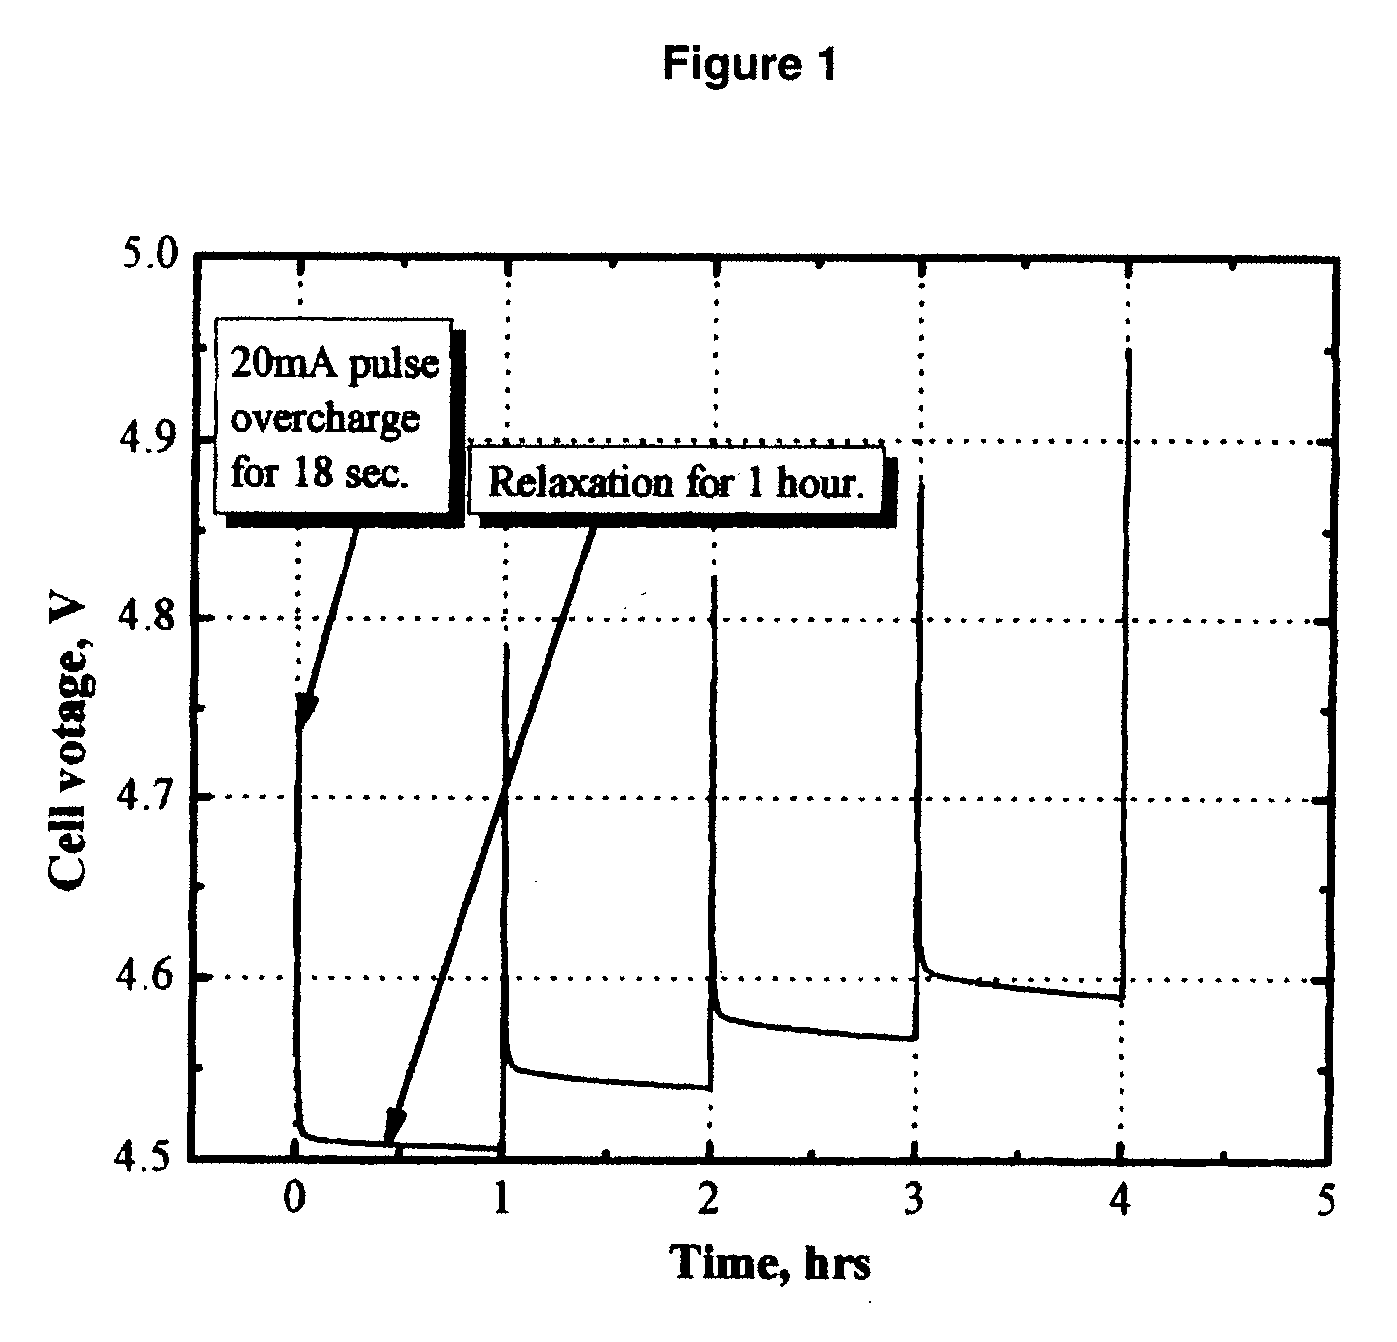 Electrolytes, cells and methods of forming passivaton layers